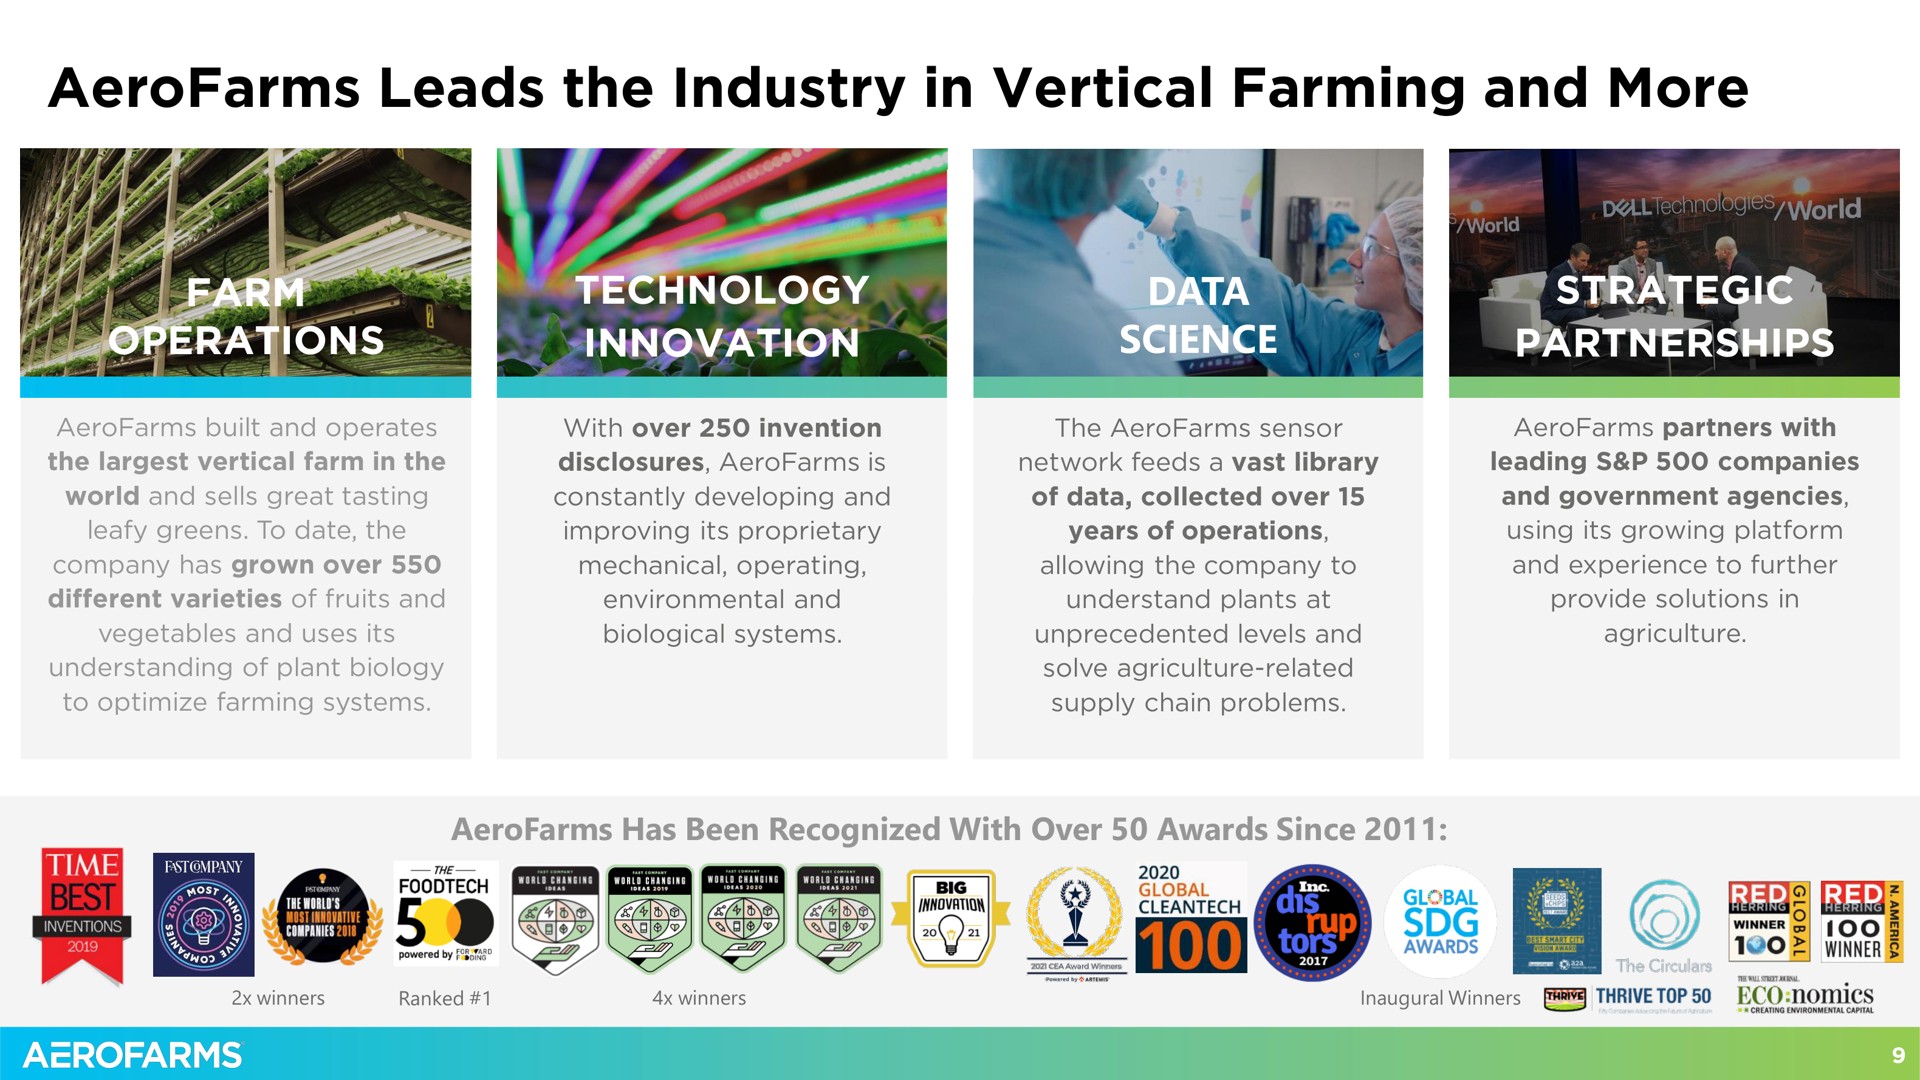 leads the industry in vertical farming and more | AeroFarms